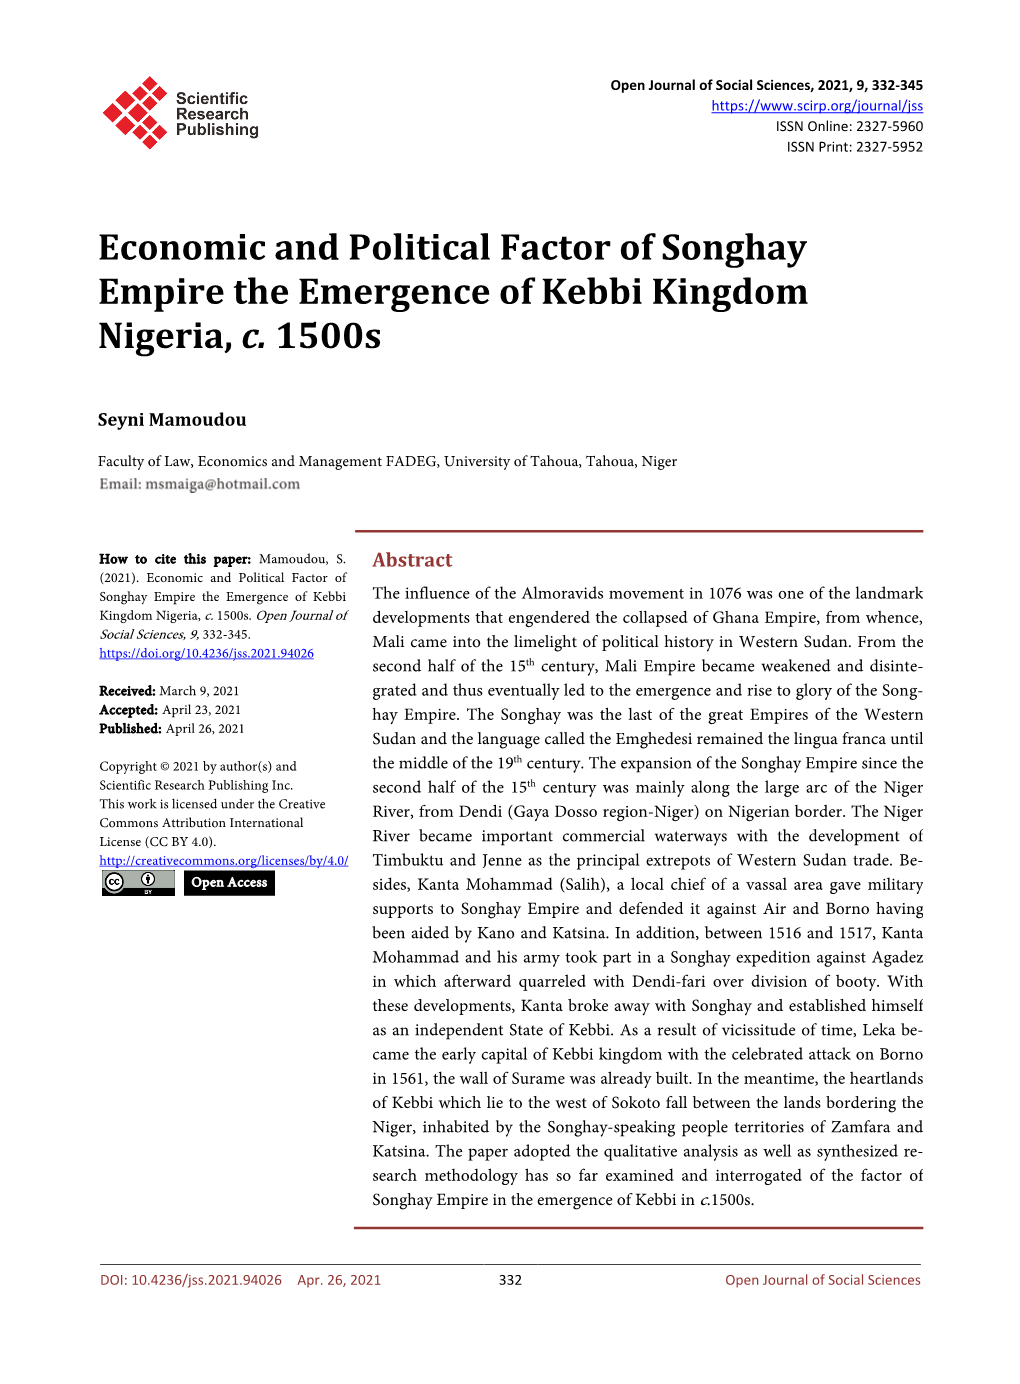 Economic and Political Factor of Songhay Empire the Emergence of Kebbi Kingdom Nigeria, C